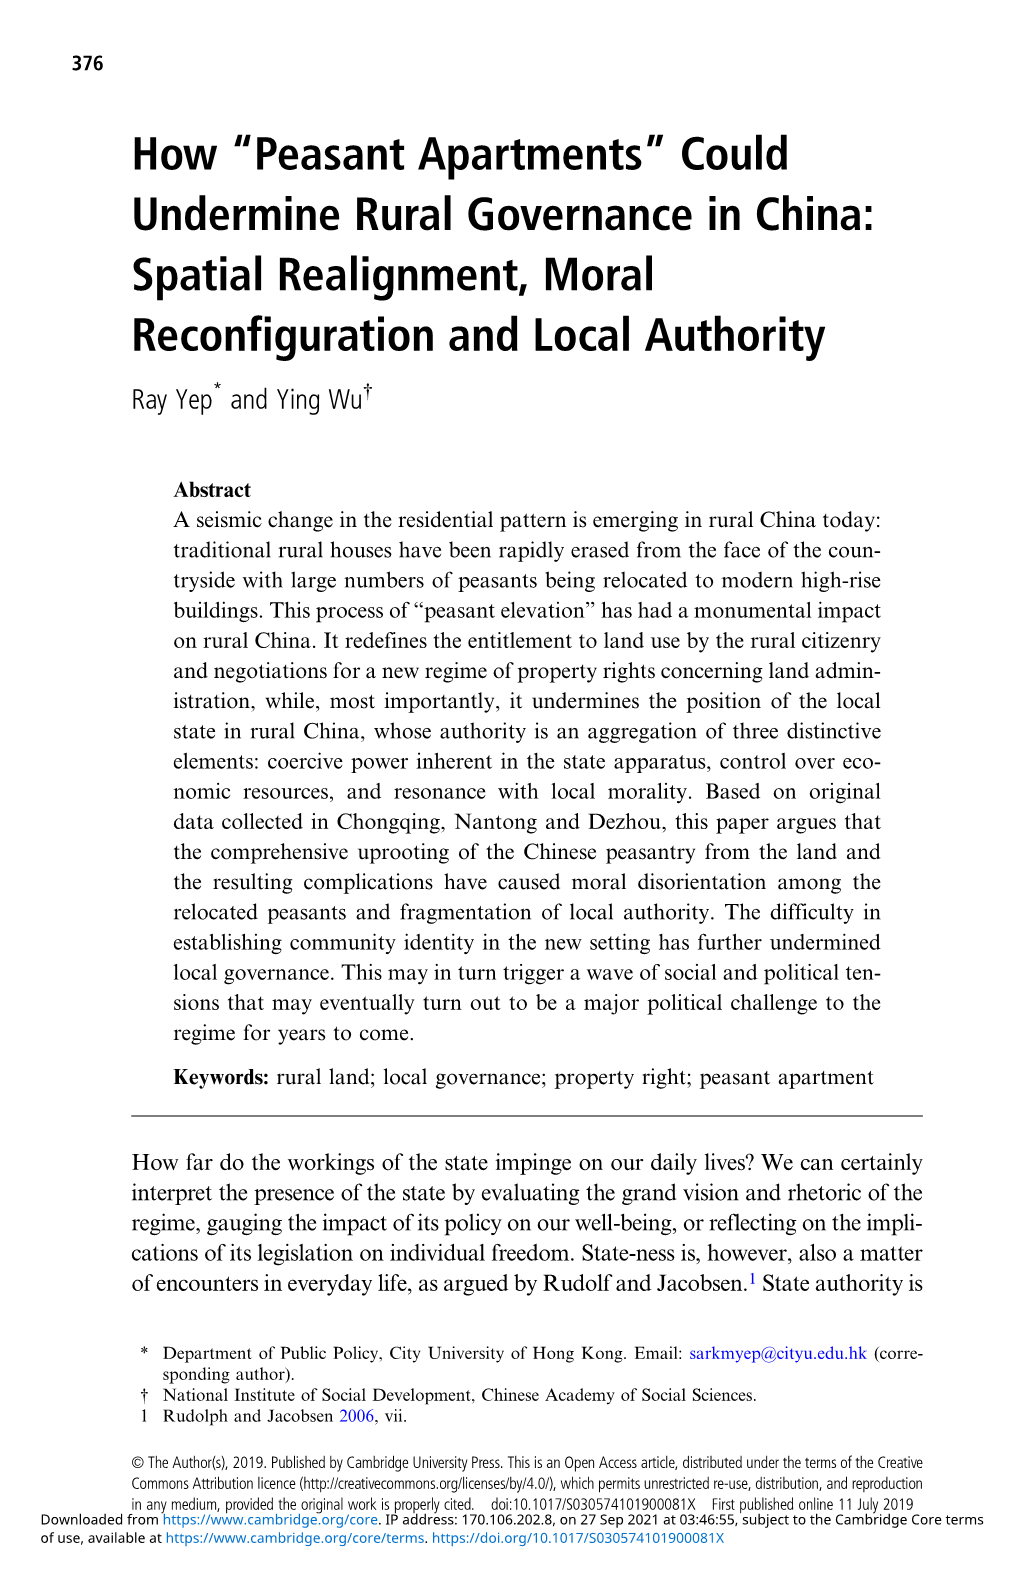 How “Peasant Apartments” Could Undermine Rural Governance in China: Spatial Realignment, Moral Reconfiguration and Local Authority Ray Yep* and Ying Wu†